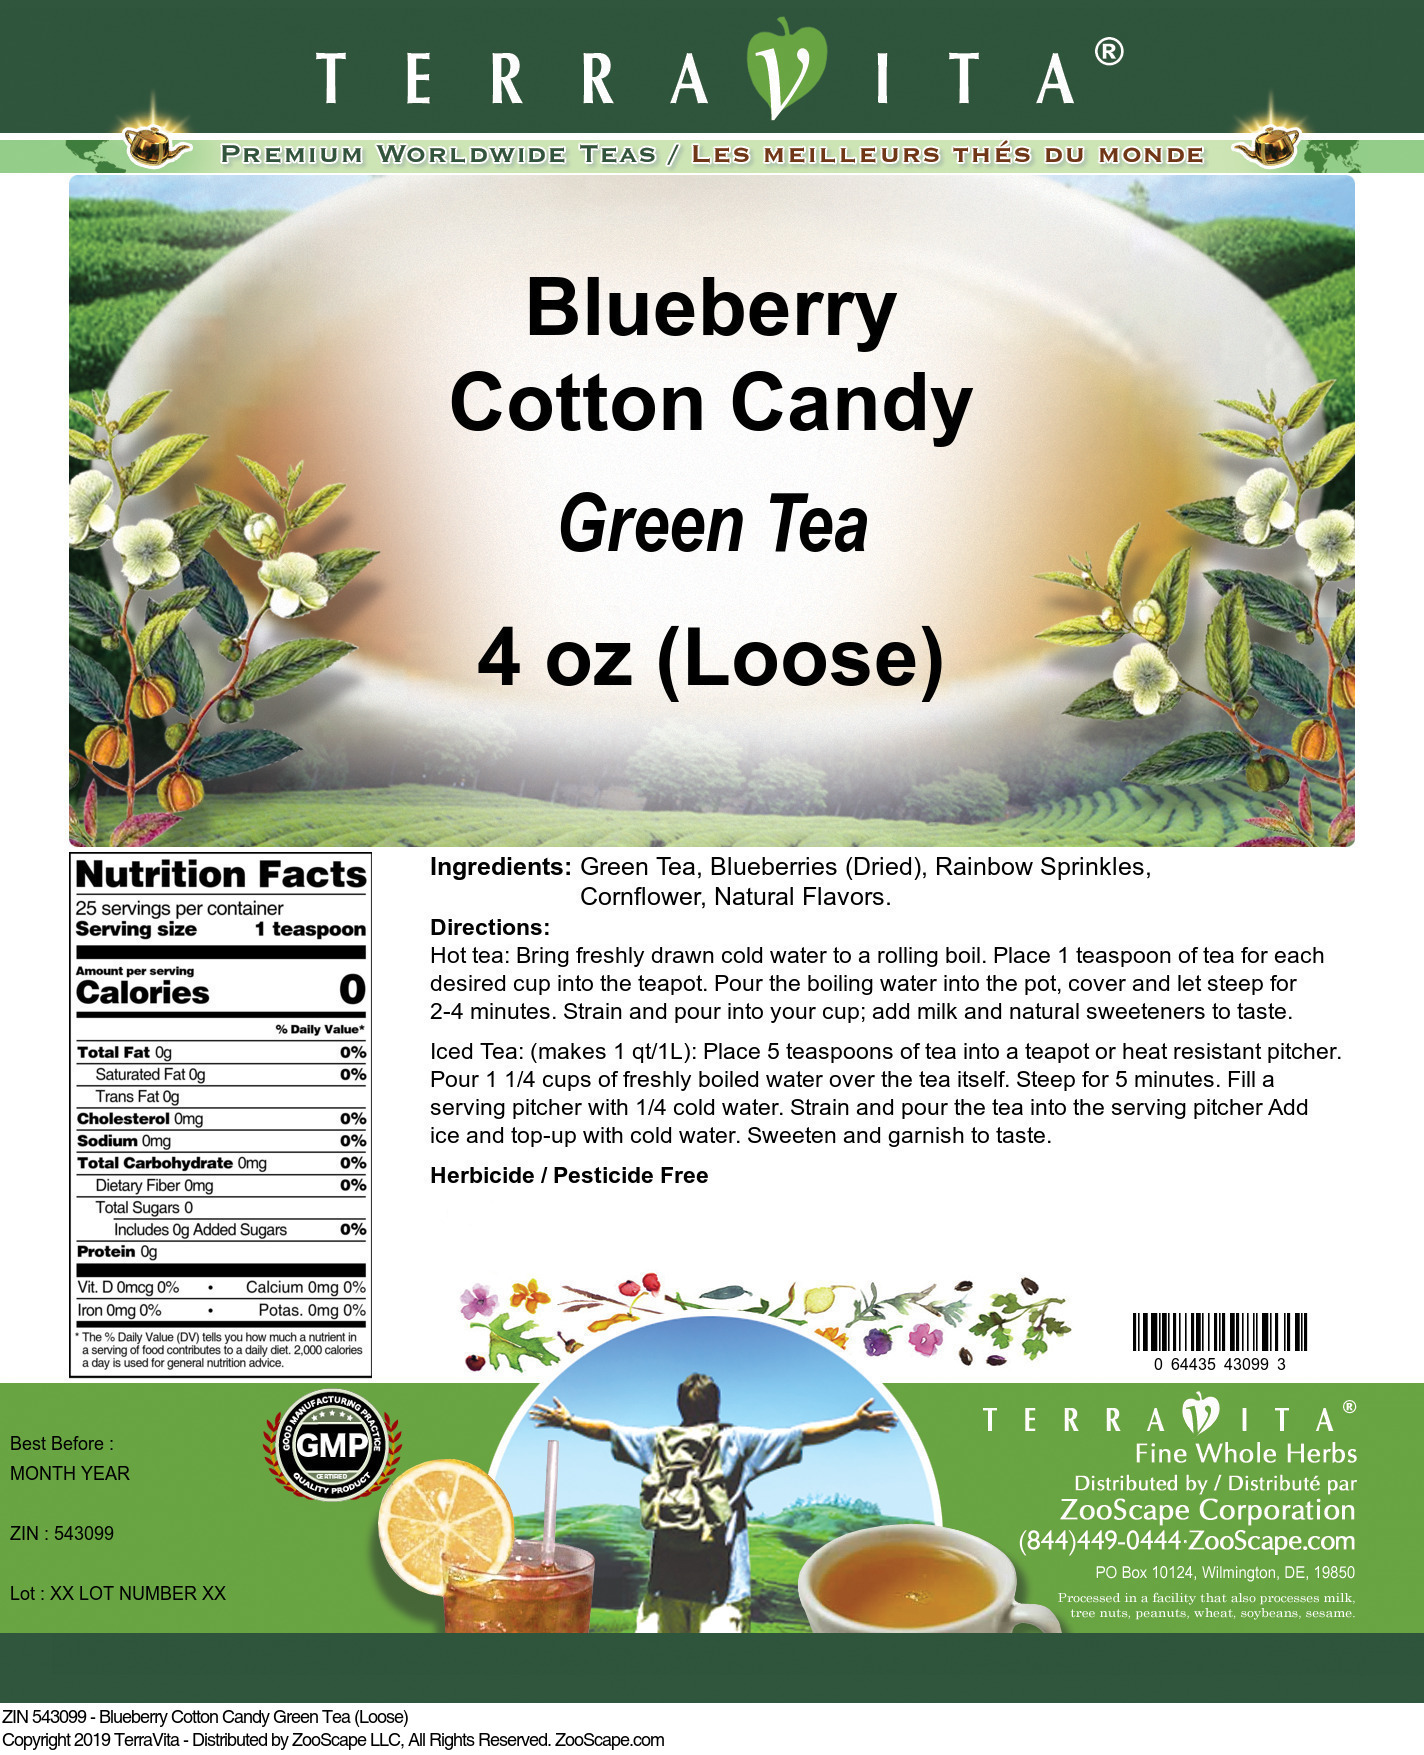 Blueberry Cotton Candy Green Tea (Loose) - Label